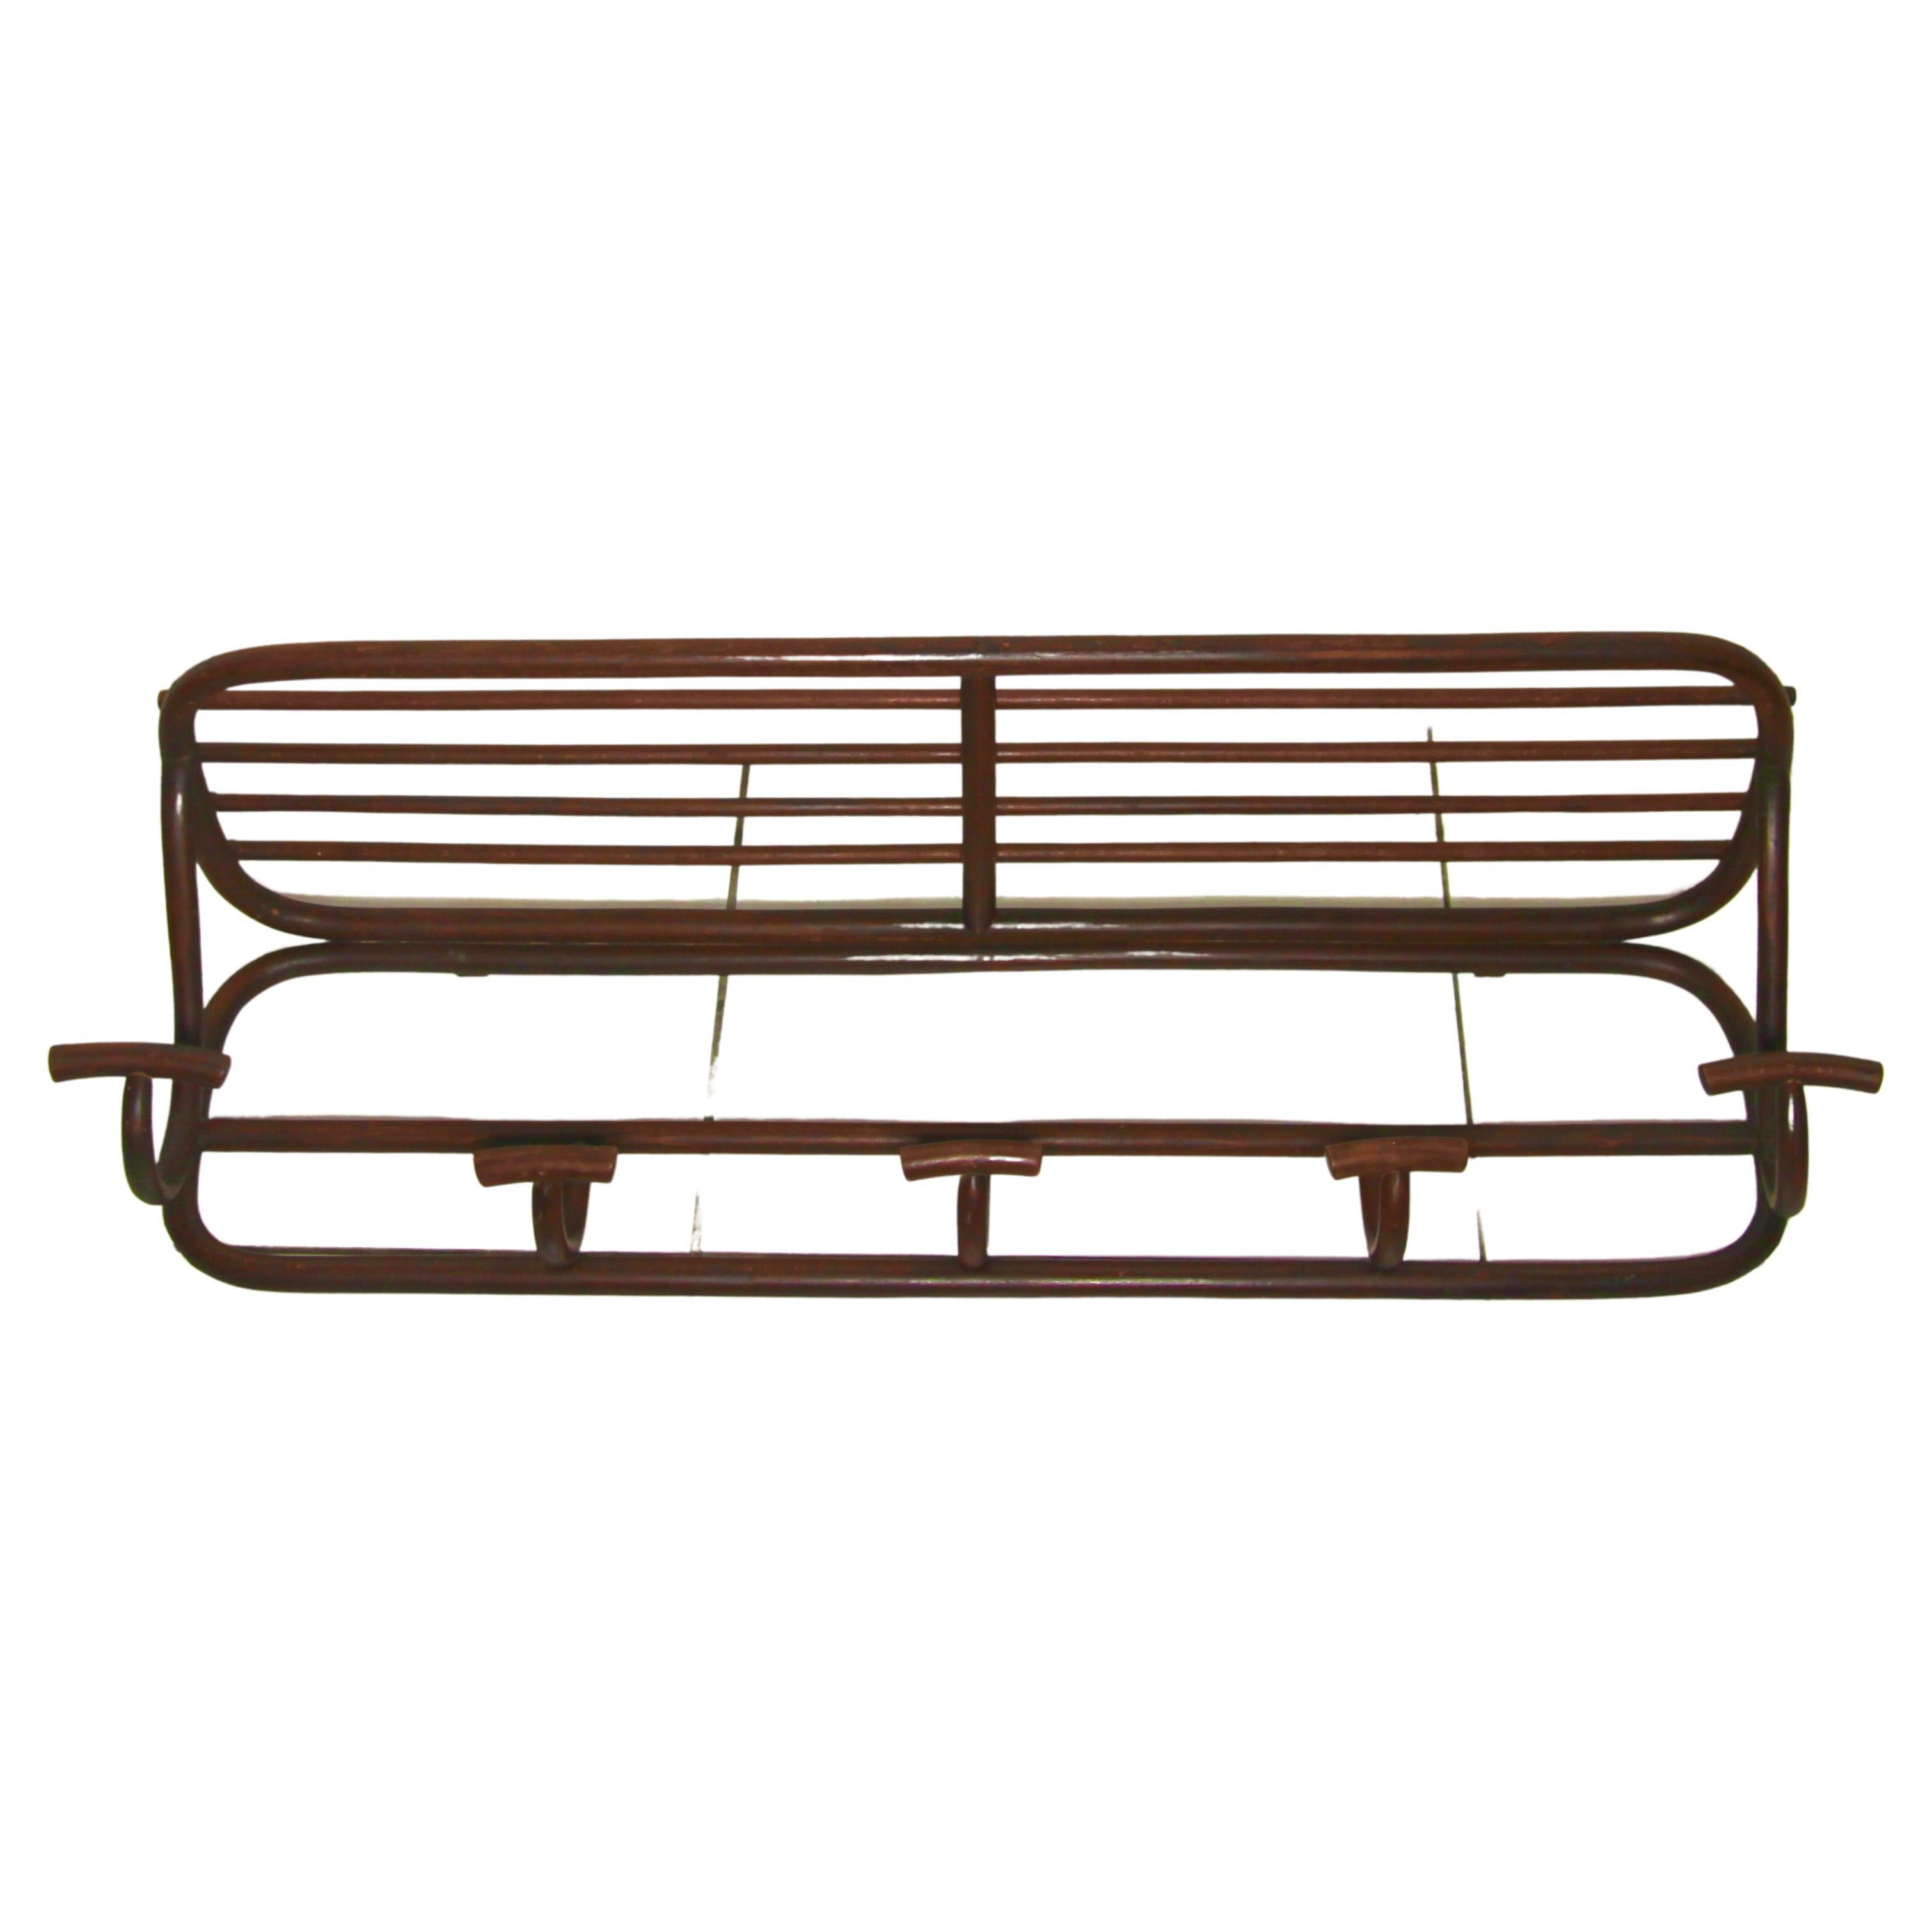 Hand-Crafted Art Nouveau Bentwood Wall Coat Rack Thonet Vienna, 1879-1887 For Sale